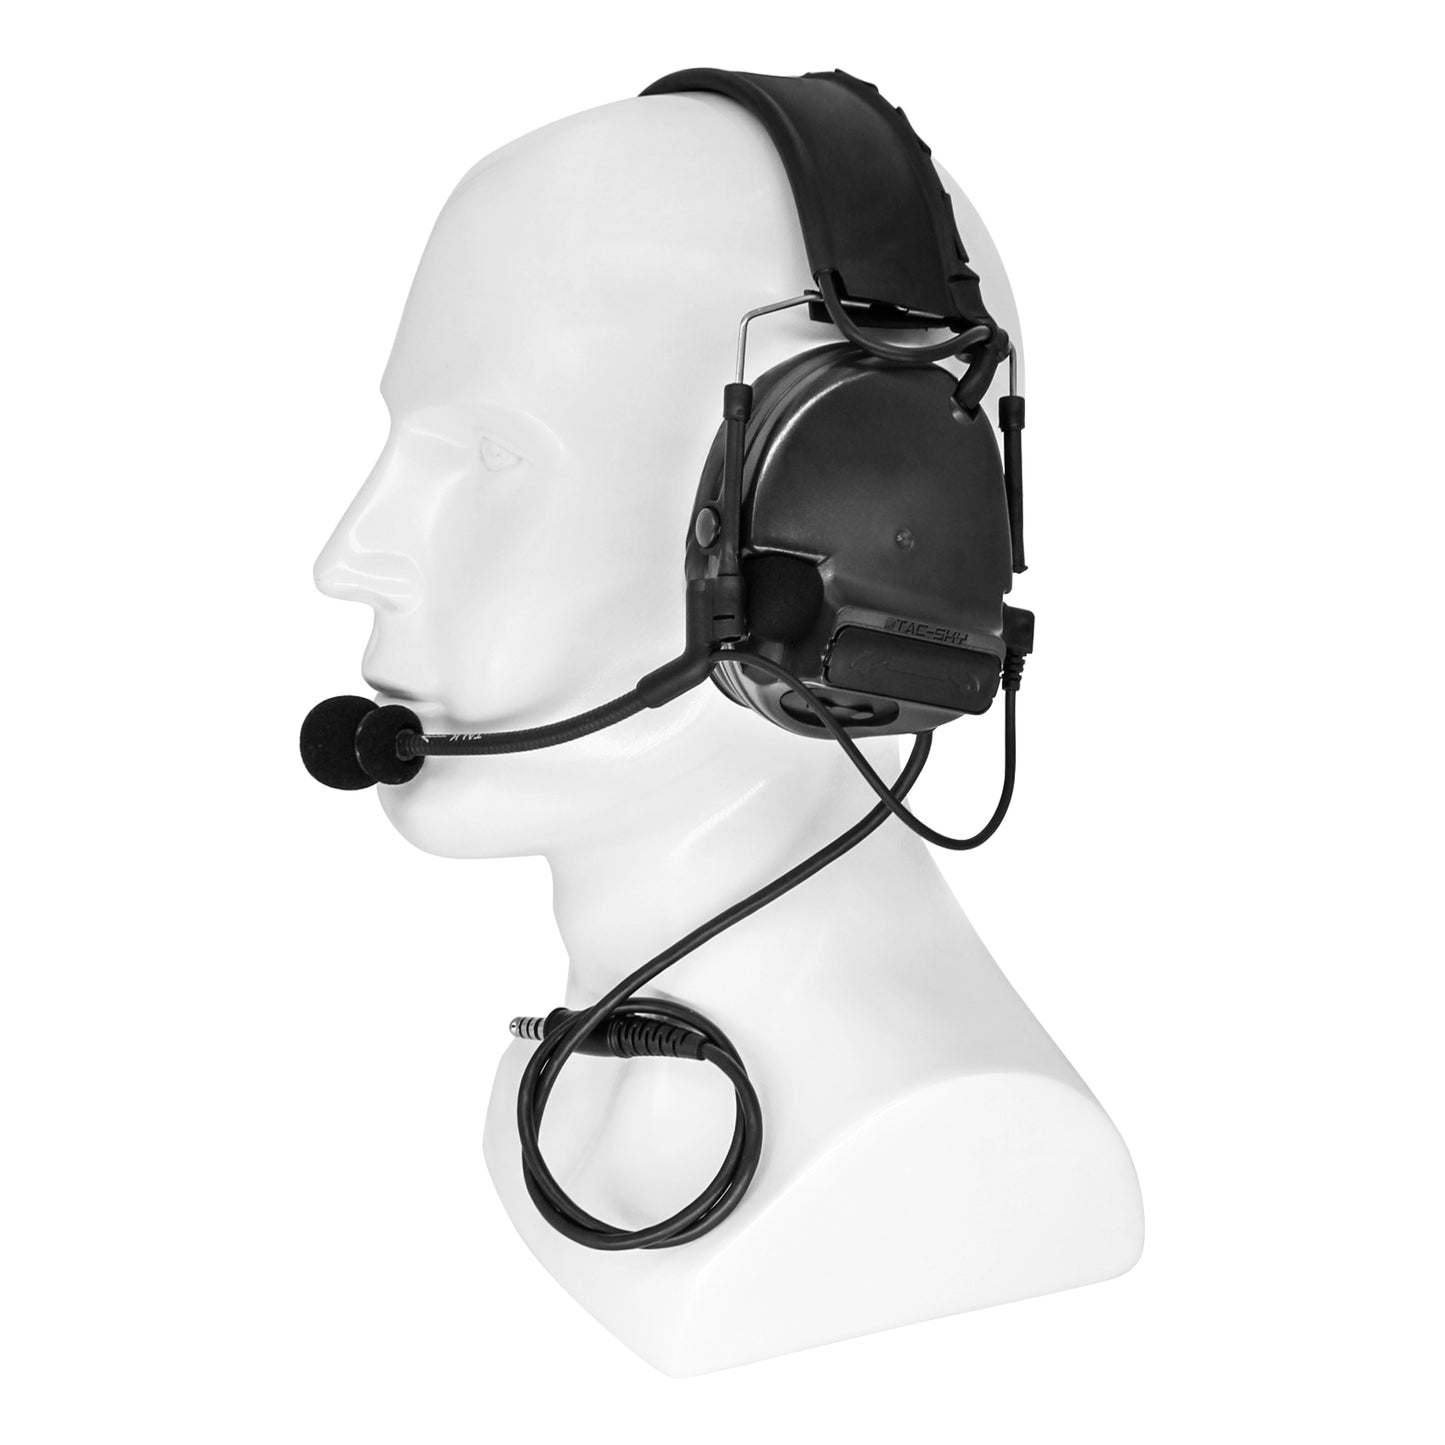 TAC-SKY C3 Tactical Headset Noise-canceling airsoft protective gear with microphone and kenwoodPTT